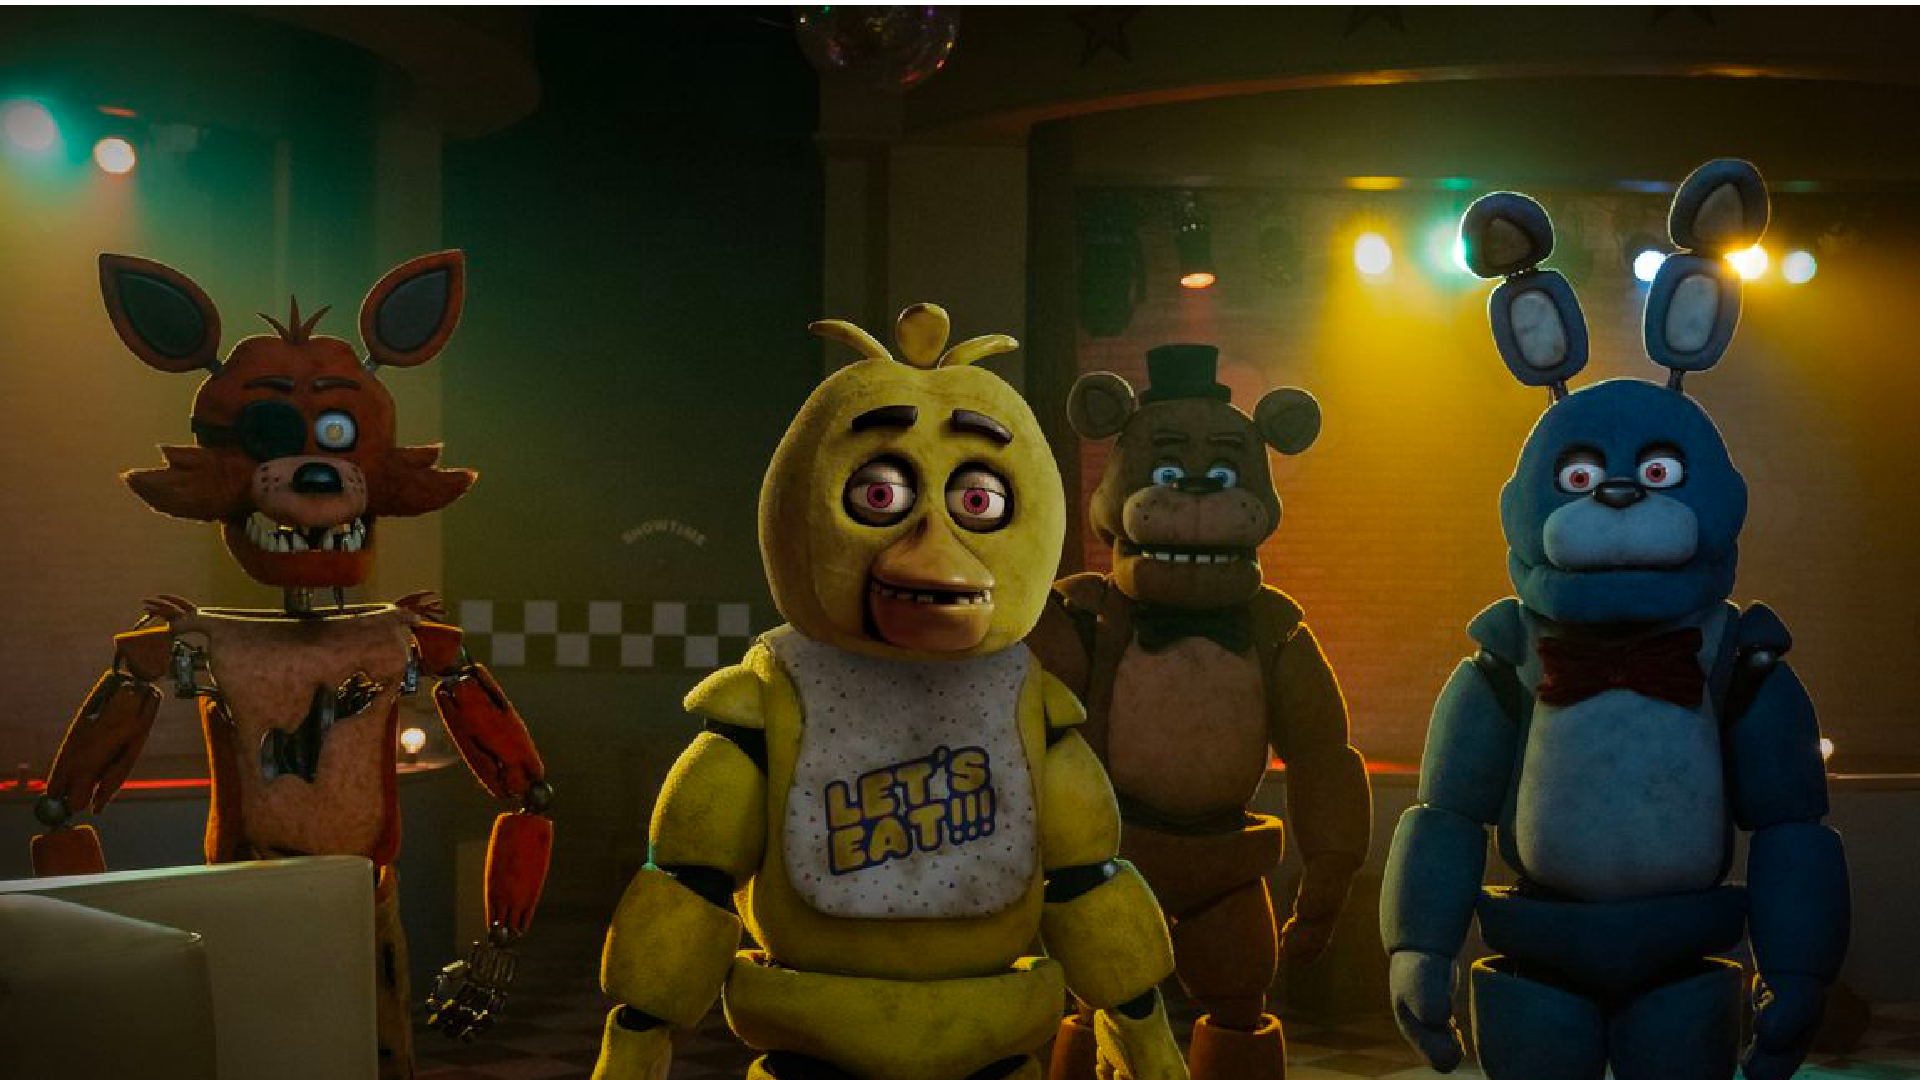 Five Nights at Freddy’s movie